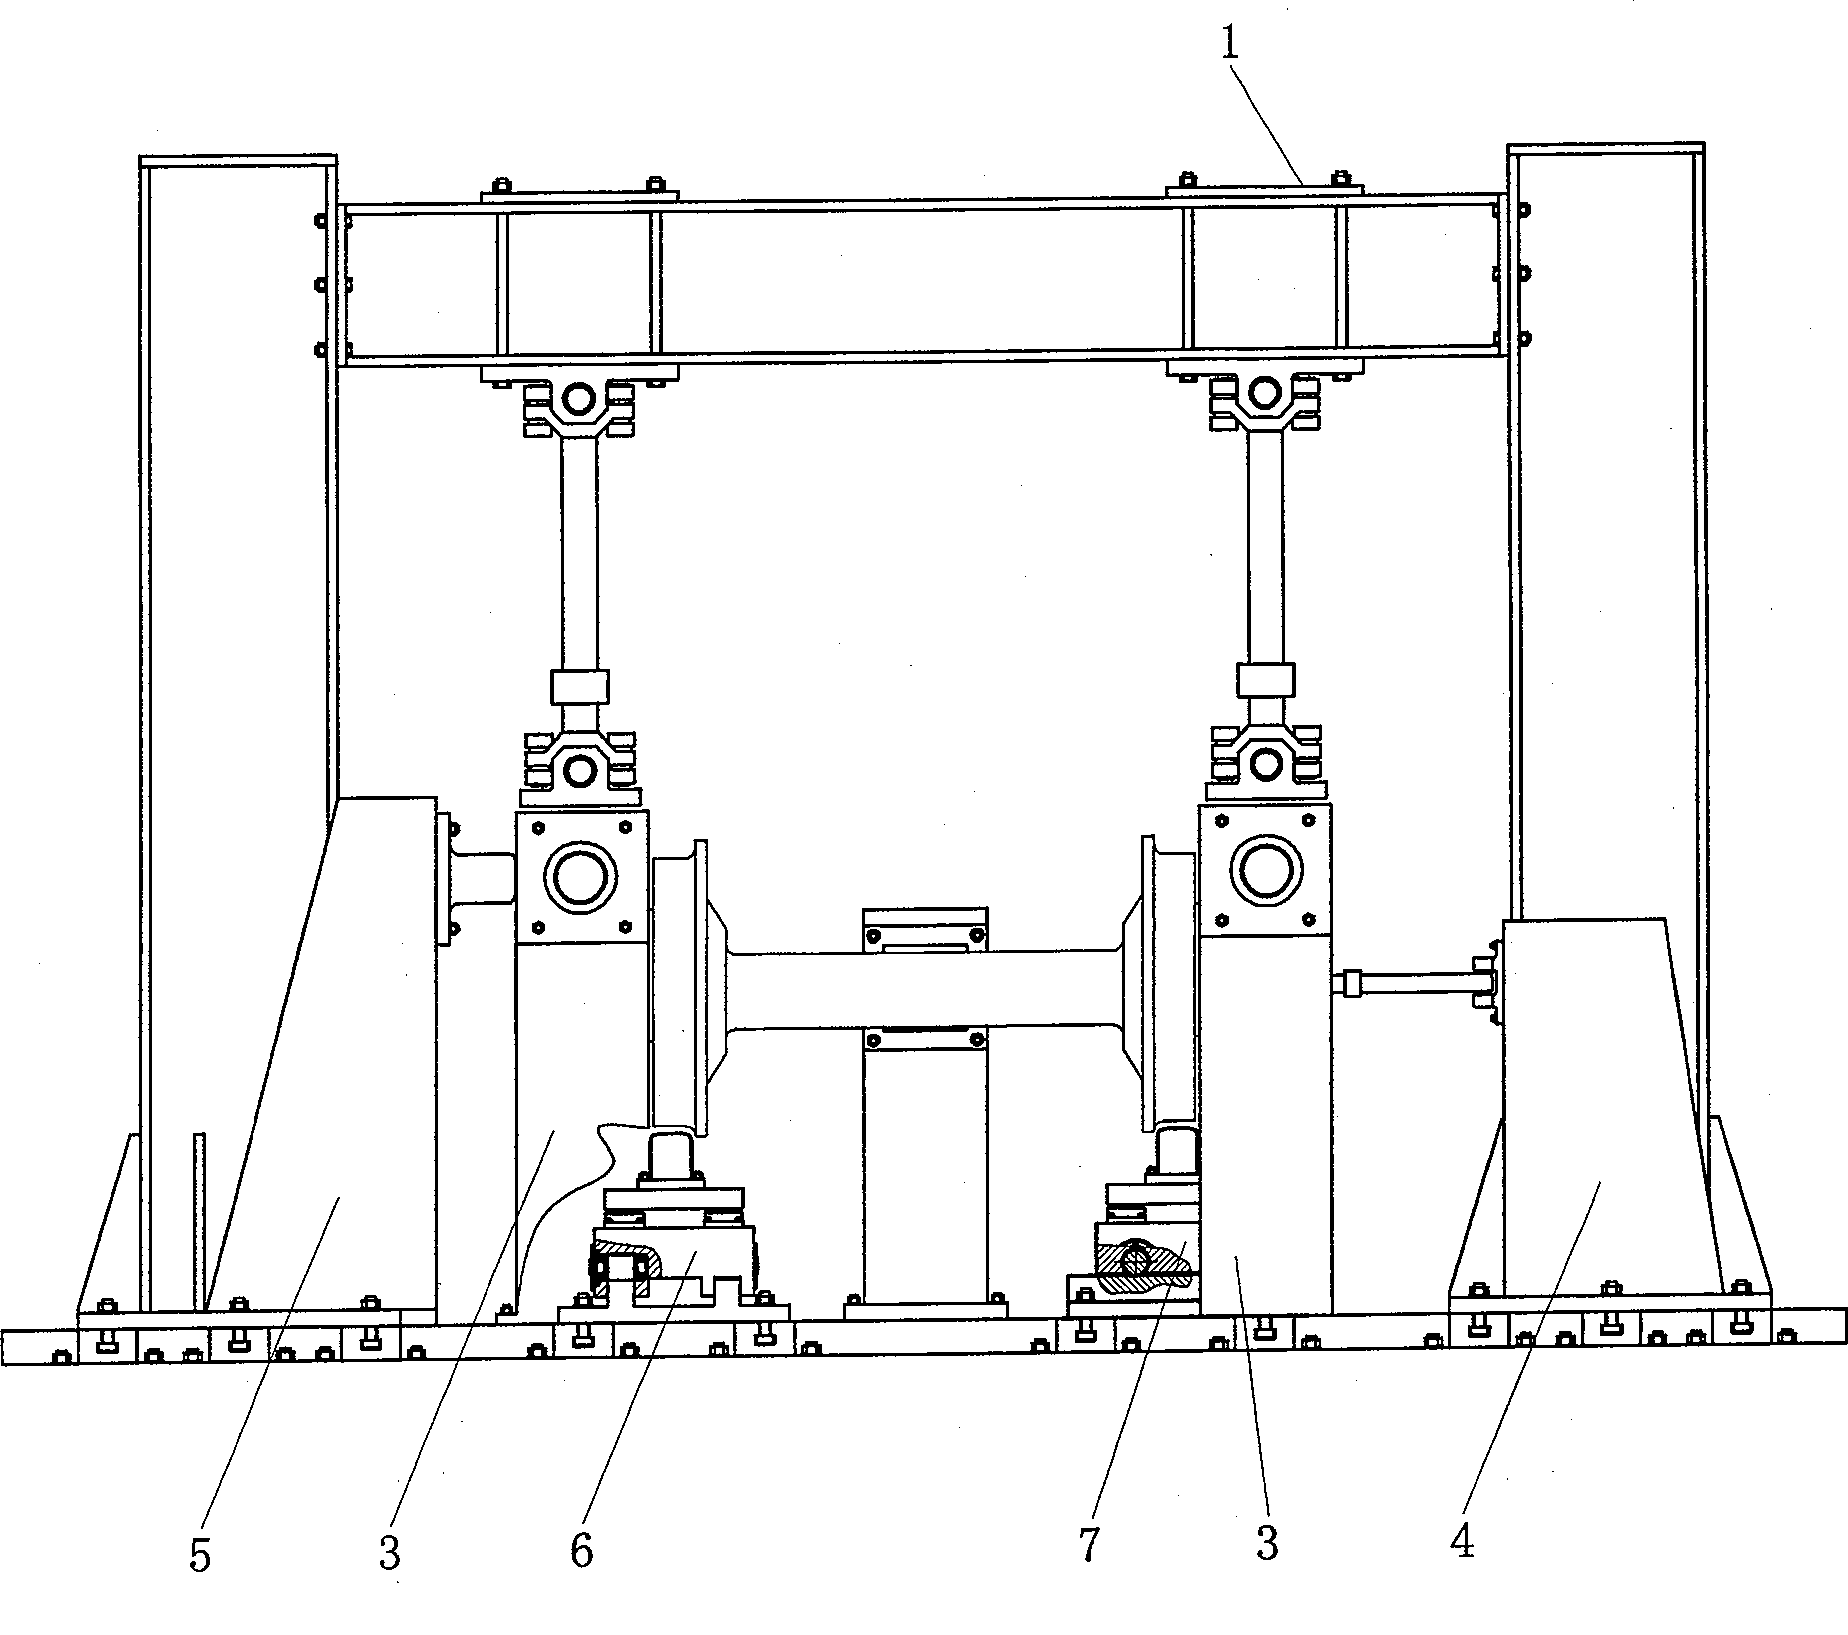 Test stand capable of simultaneously measuring railway stock bogie three-way rigidity